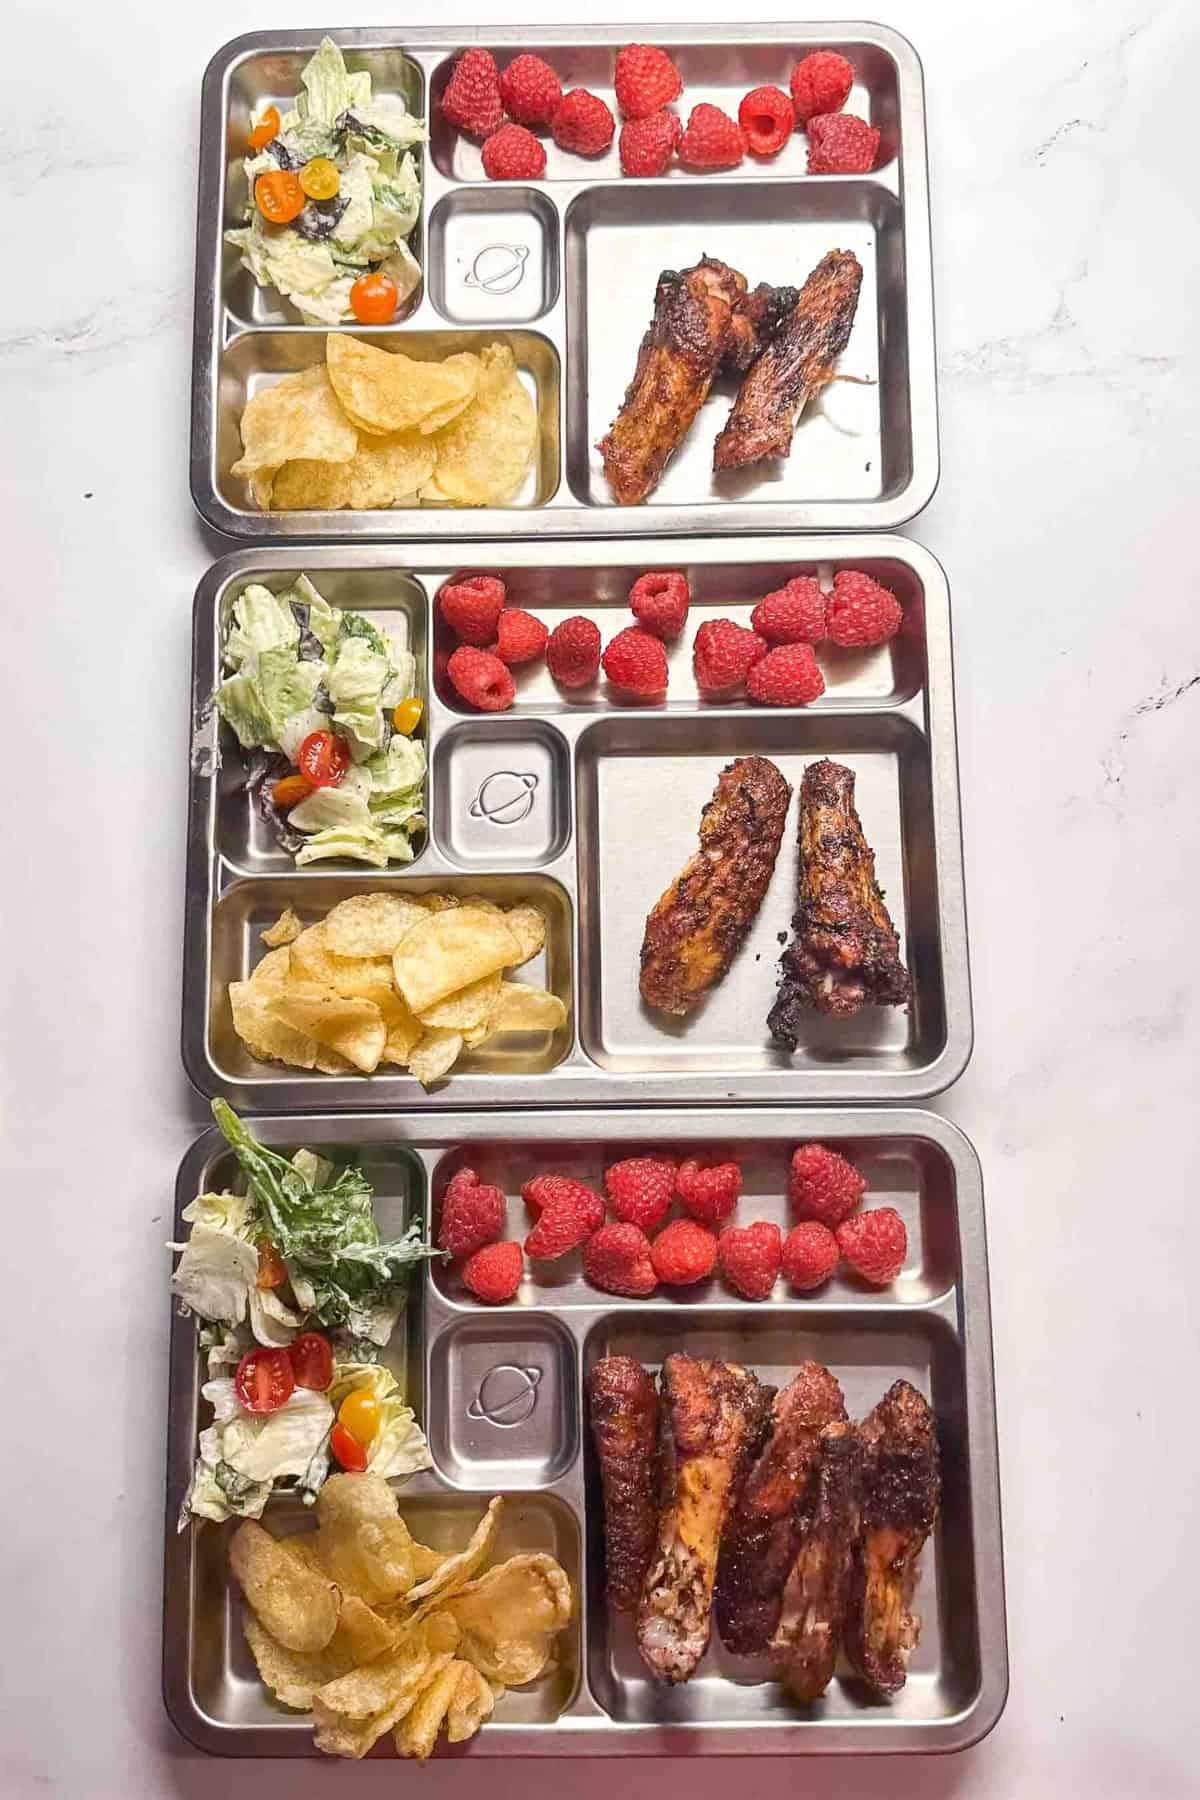 three kids plates to show how to serve this meal to kids